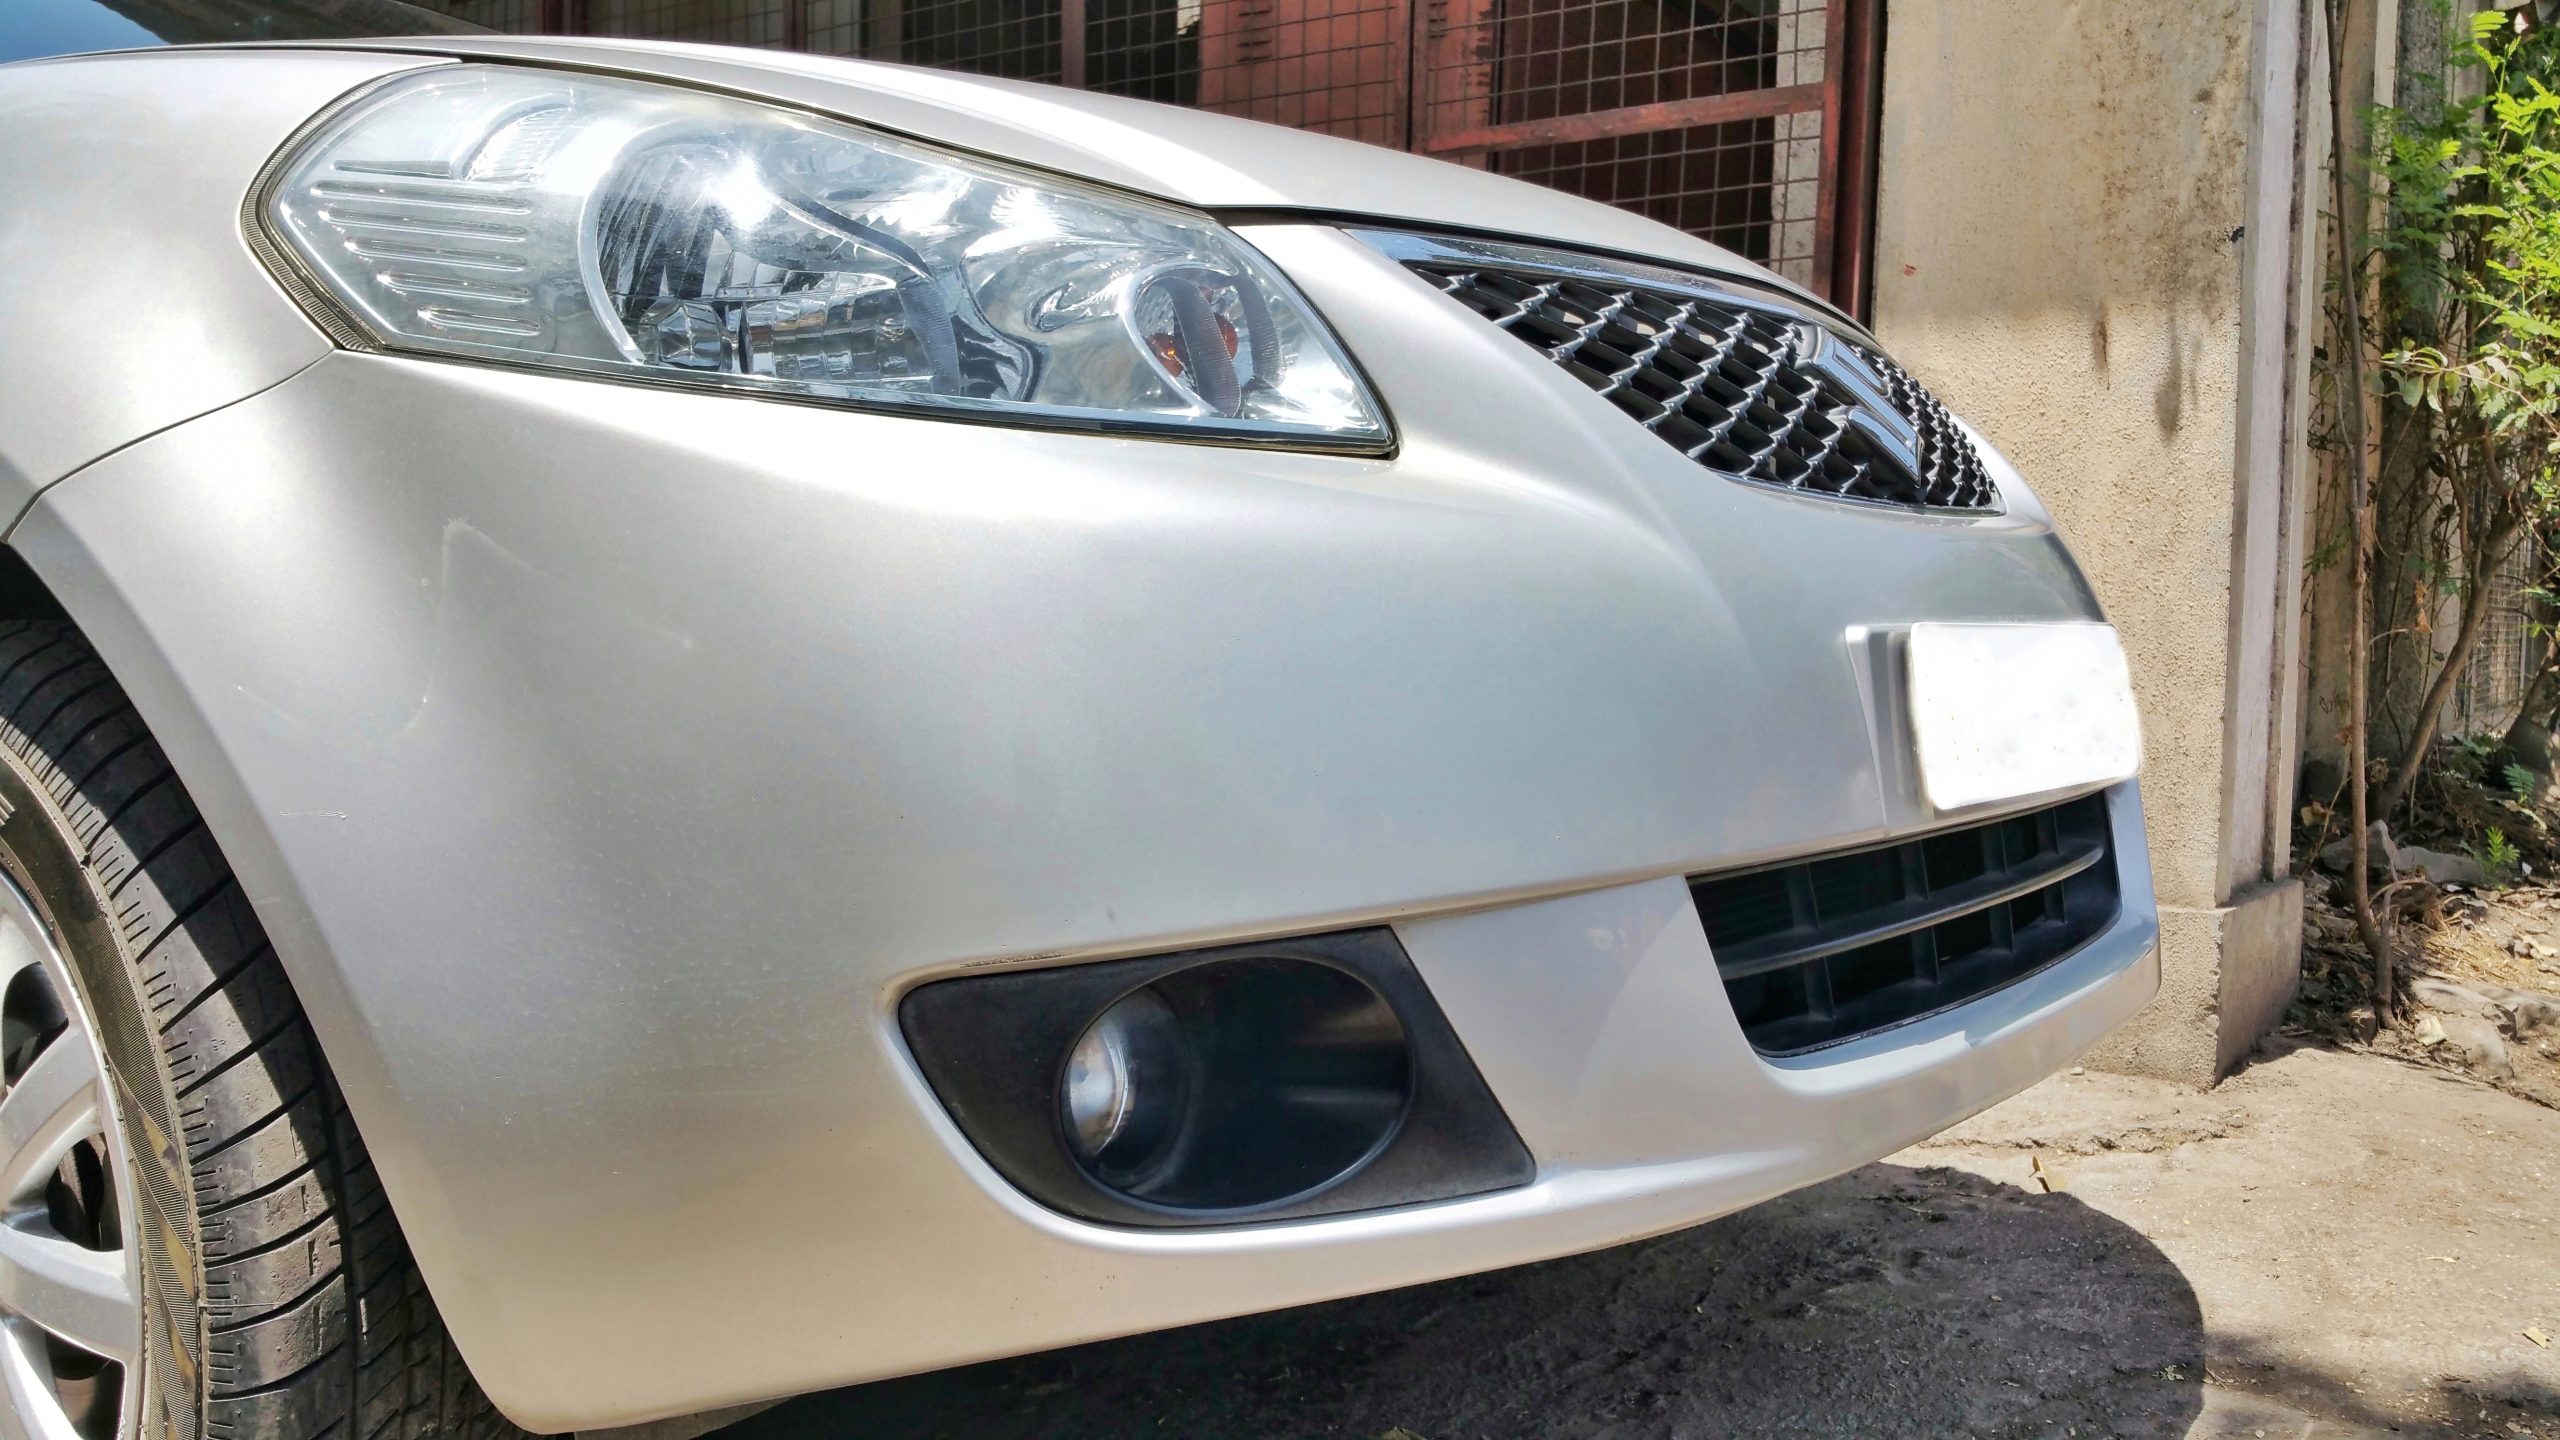 The Shining Silver Knight Sx4 that saved Harshal & his Family.